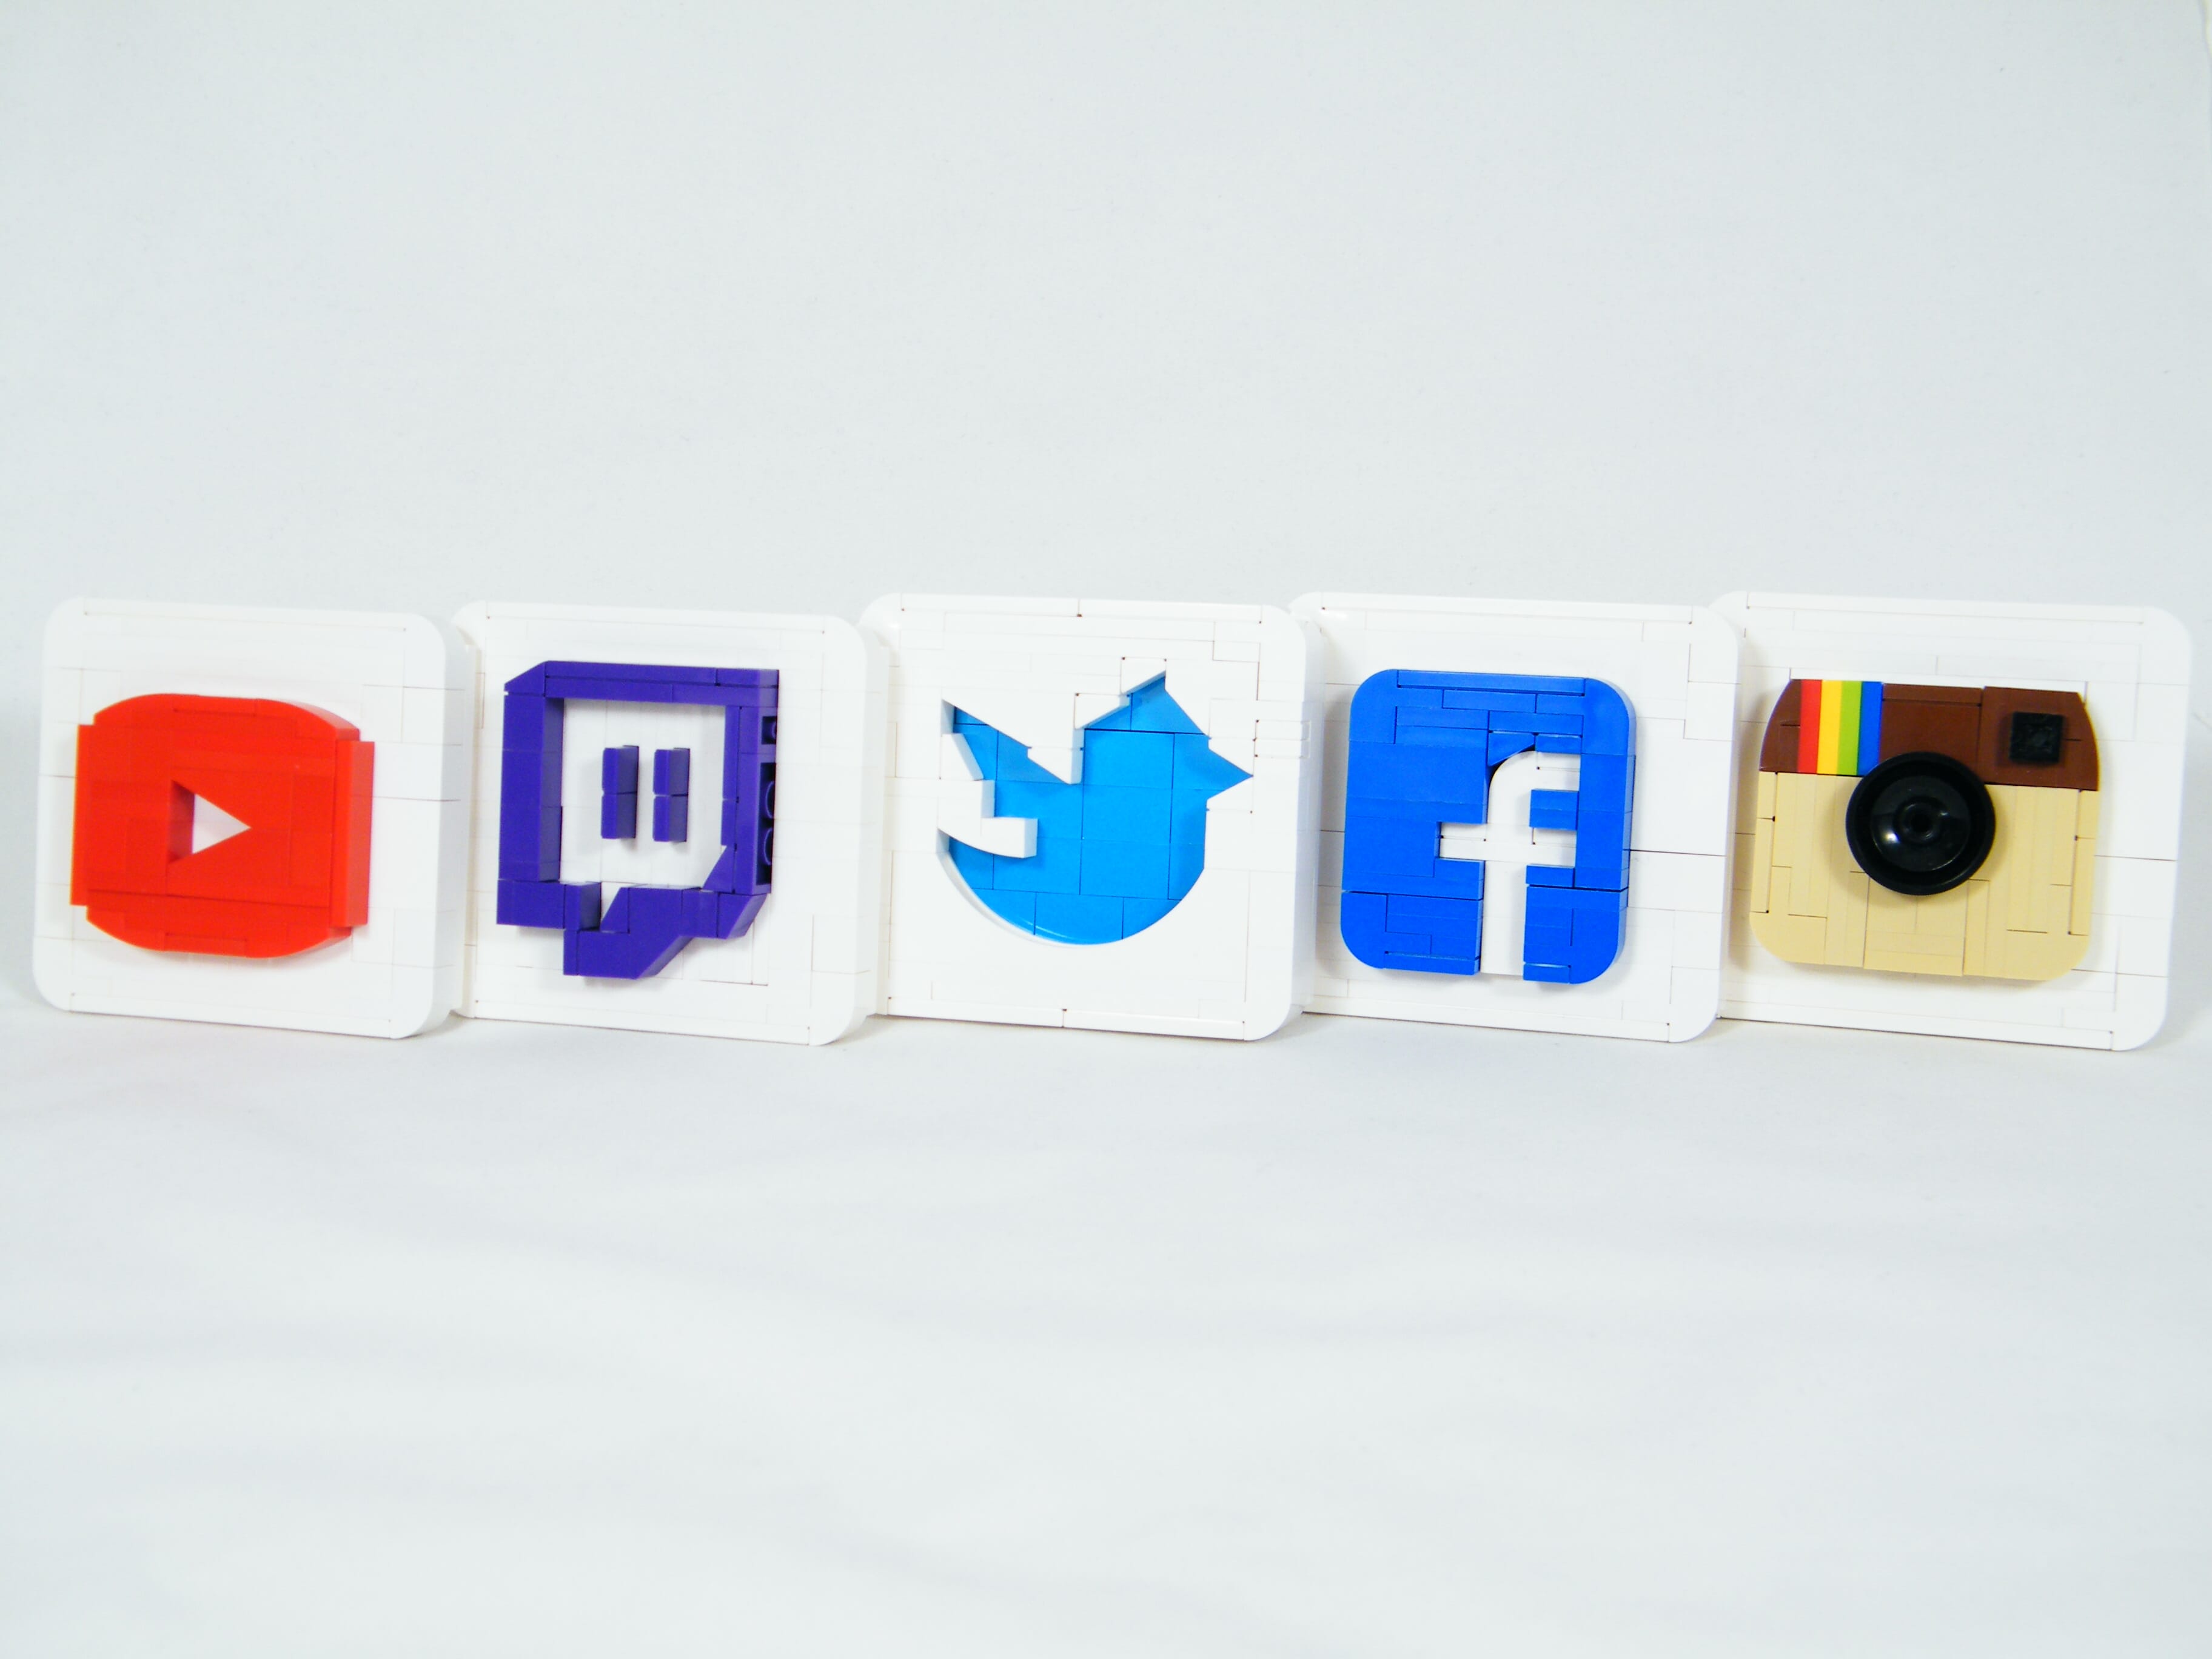 "Social Media Logos" by BrickinNick is licensed under CC BY-NC 2.0